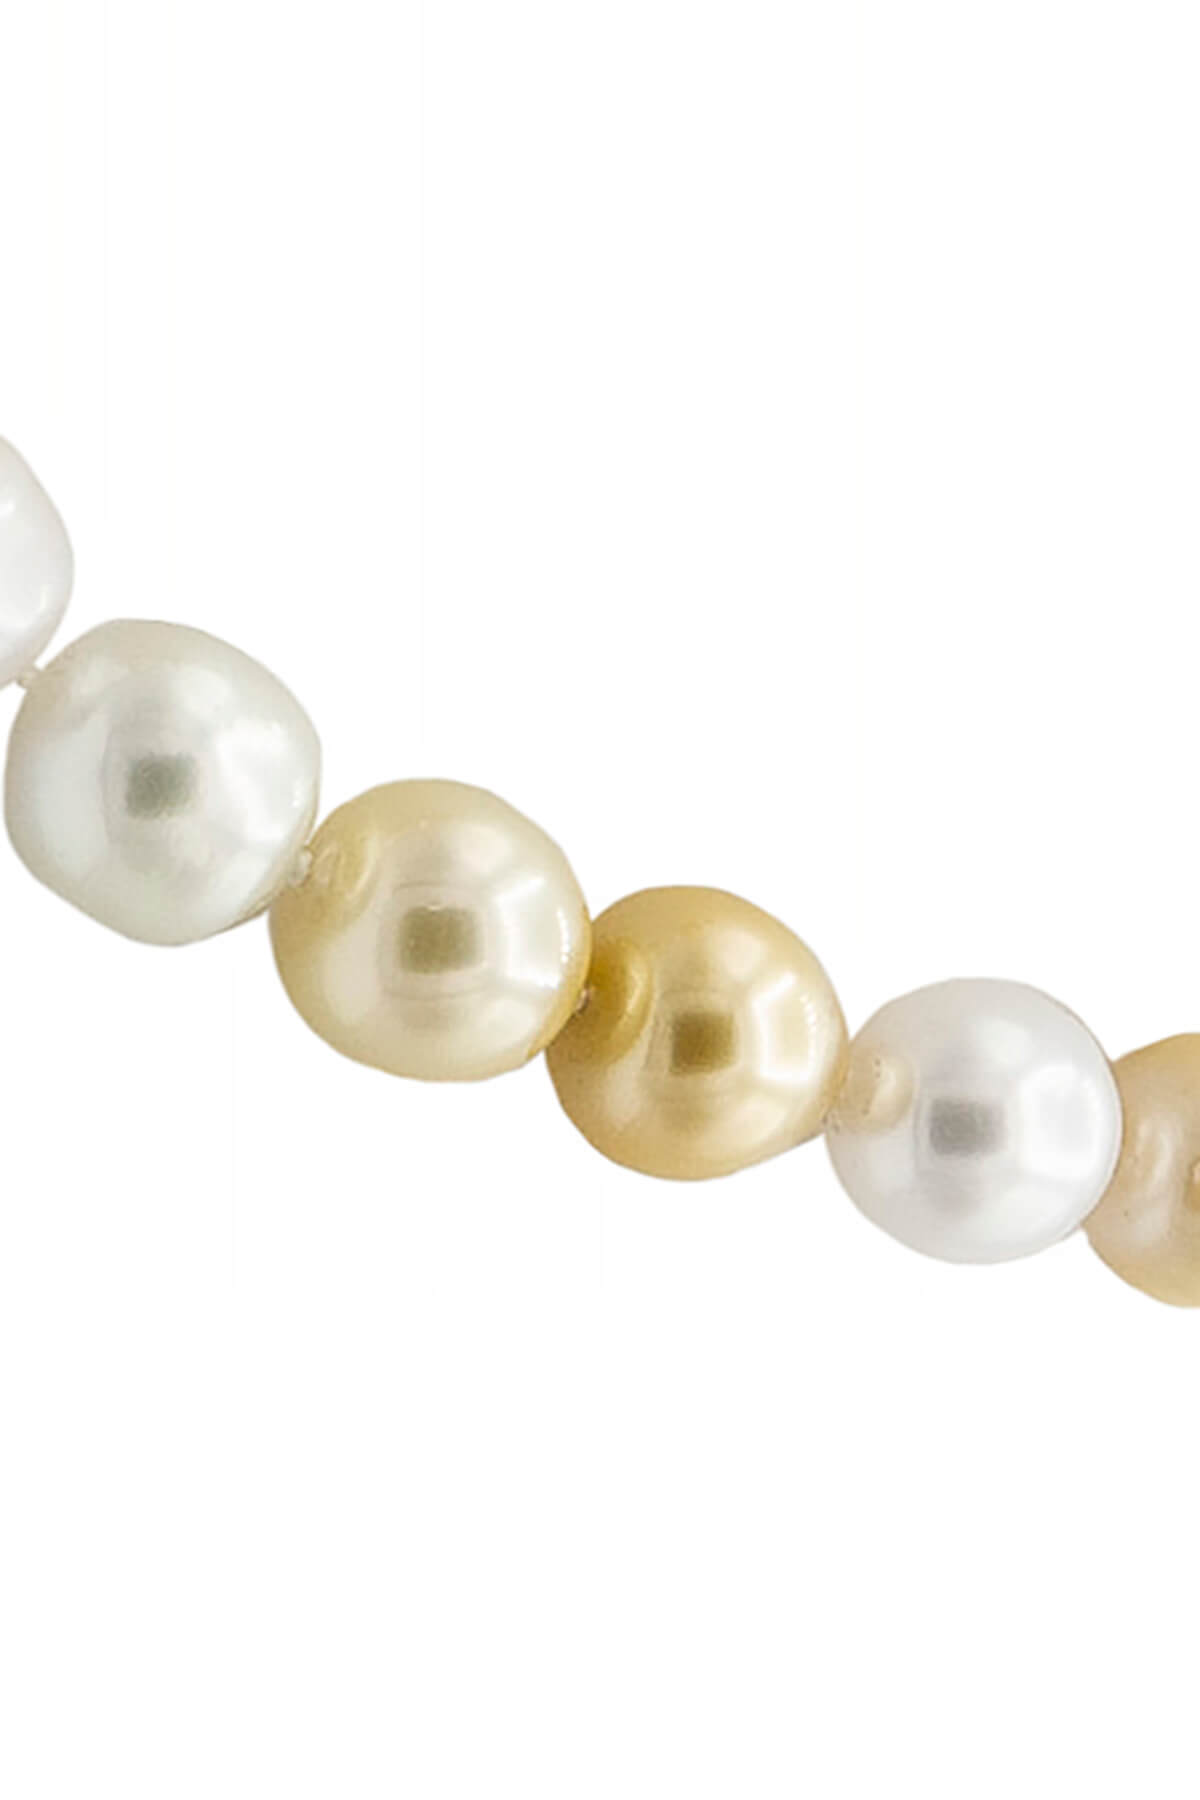 White & Gold Pearl Necklace